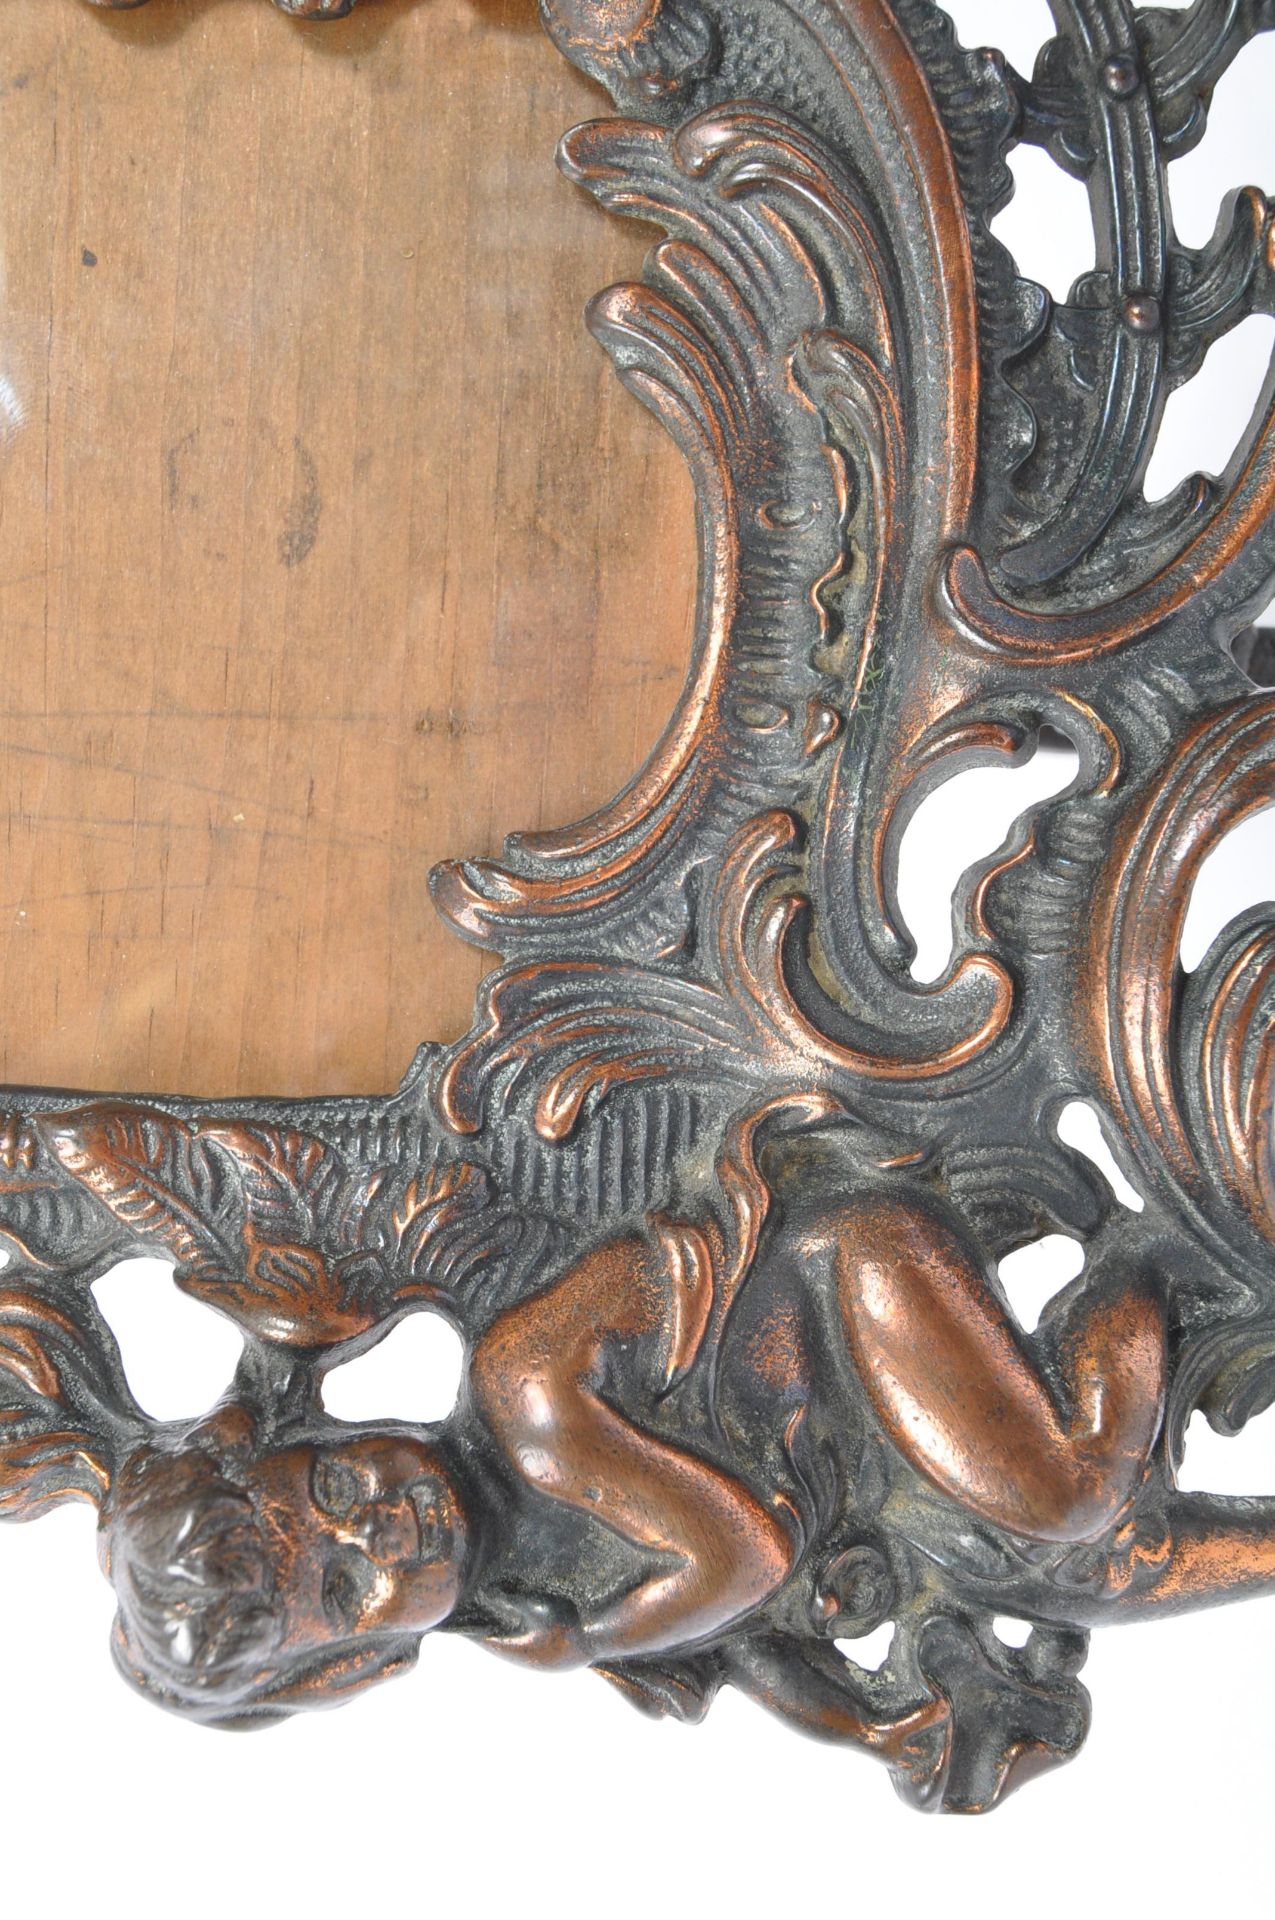 VICTORIAN FRENCH ART NOUVEAU PHOTO FRAME - Image 3 of 5